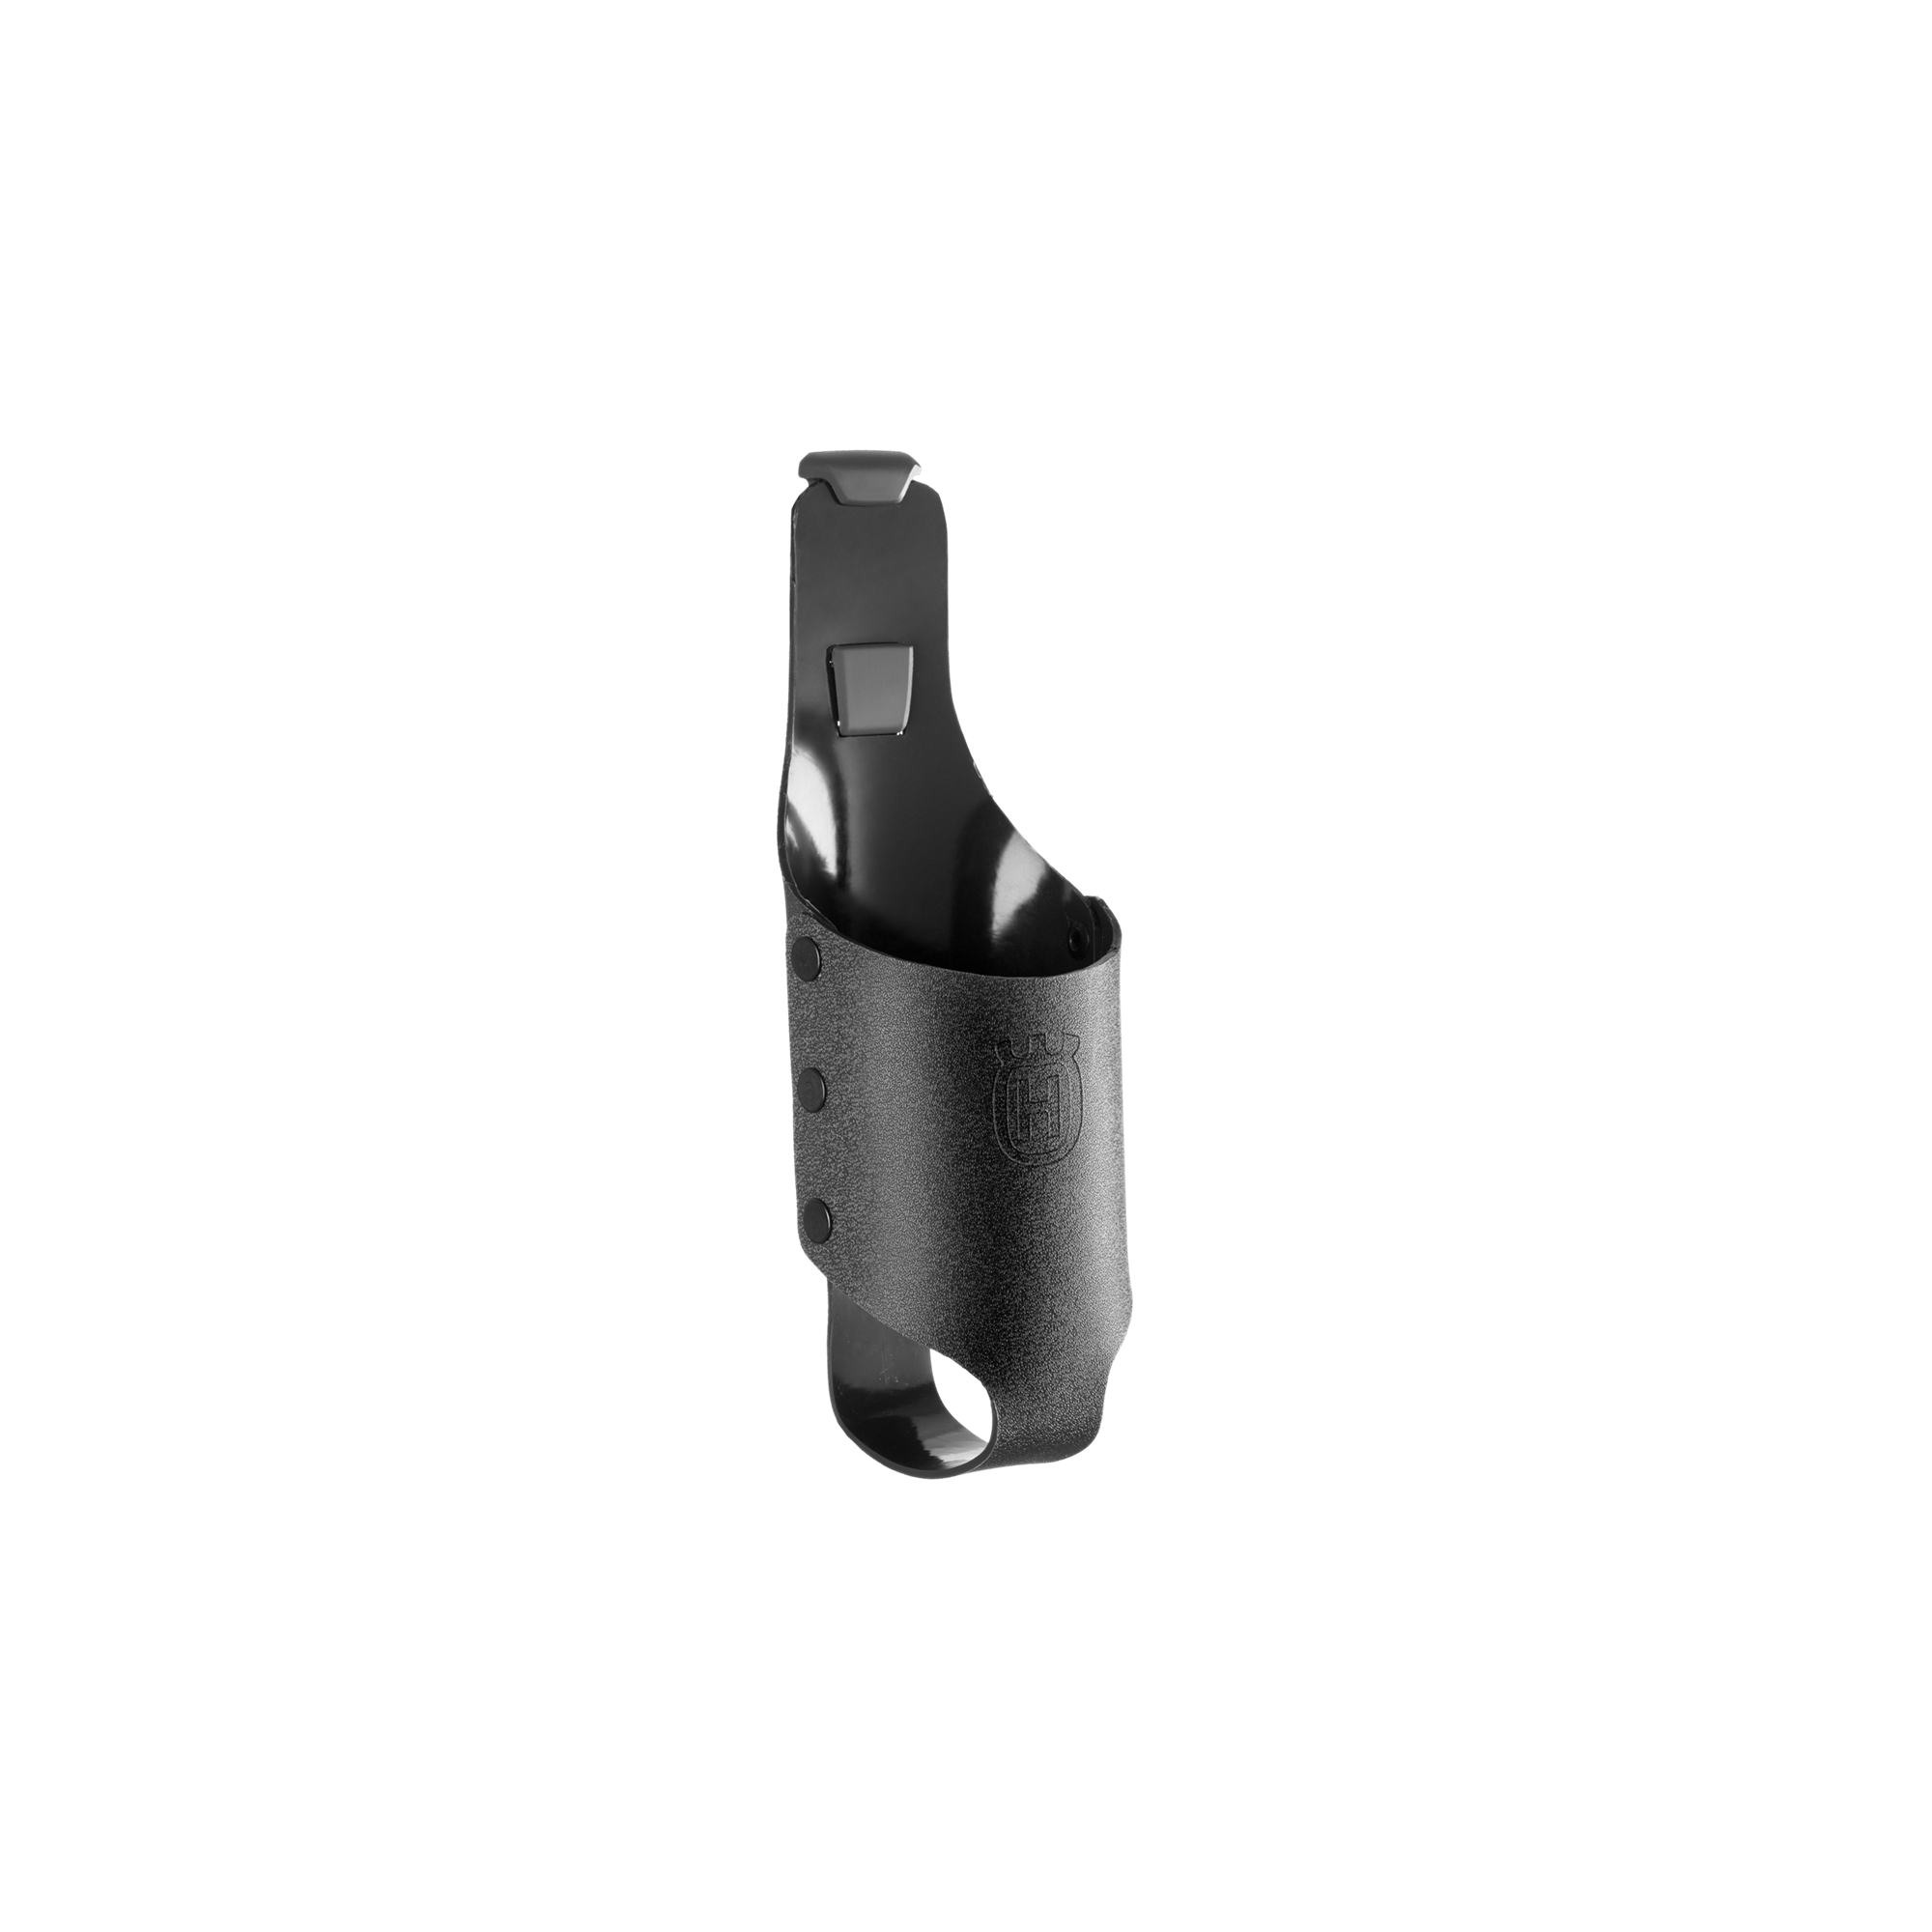 Image for Spray can holder from HusqvarnaB2C